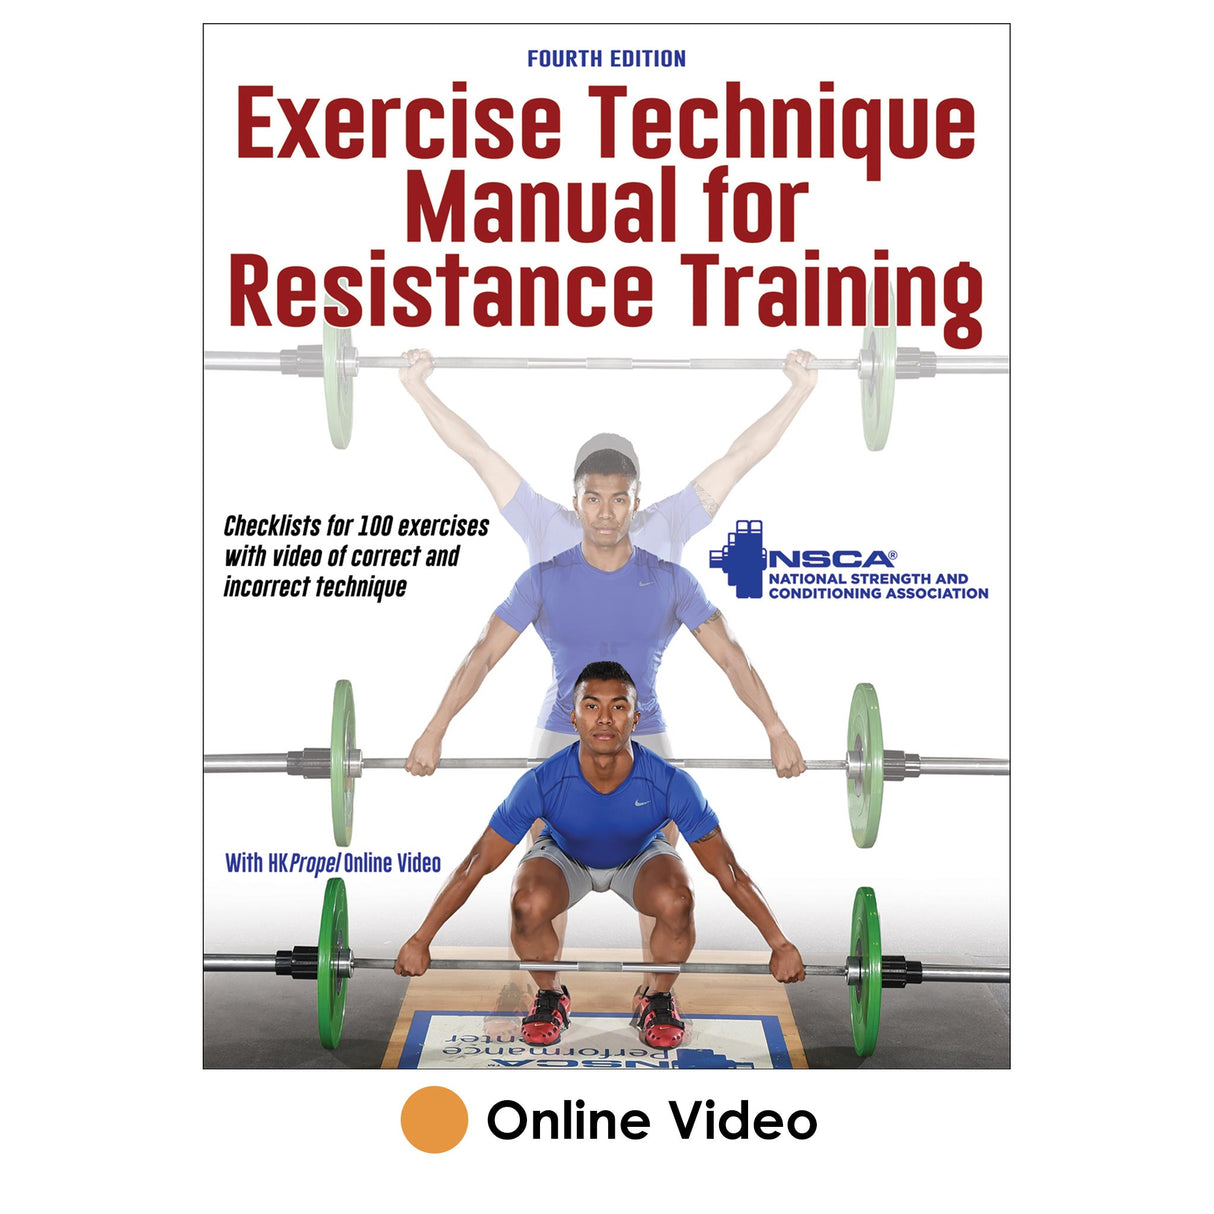 Exercise Technique Manual for Resistance Training 4th Edition HKPropel Online Video